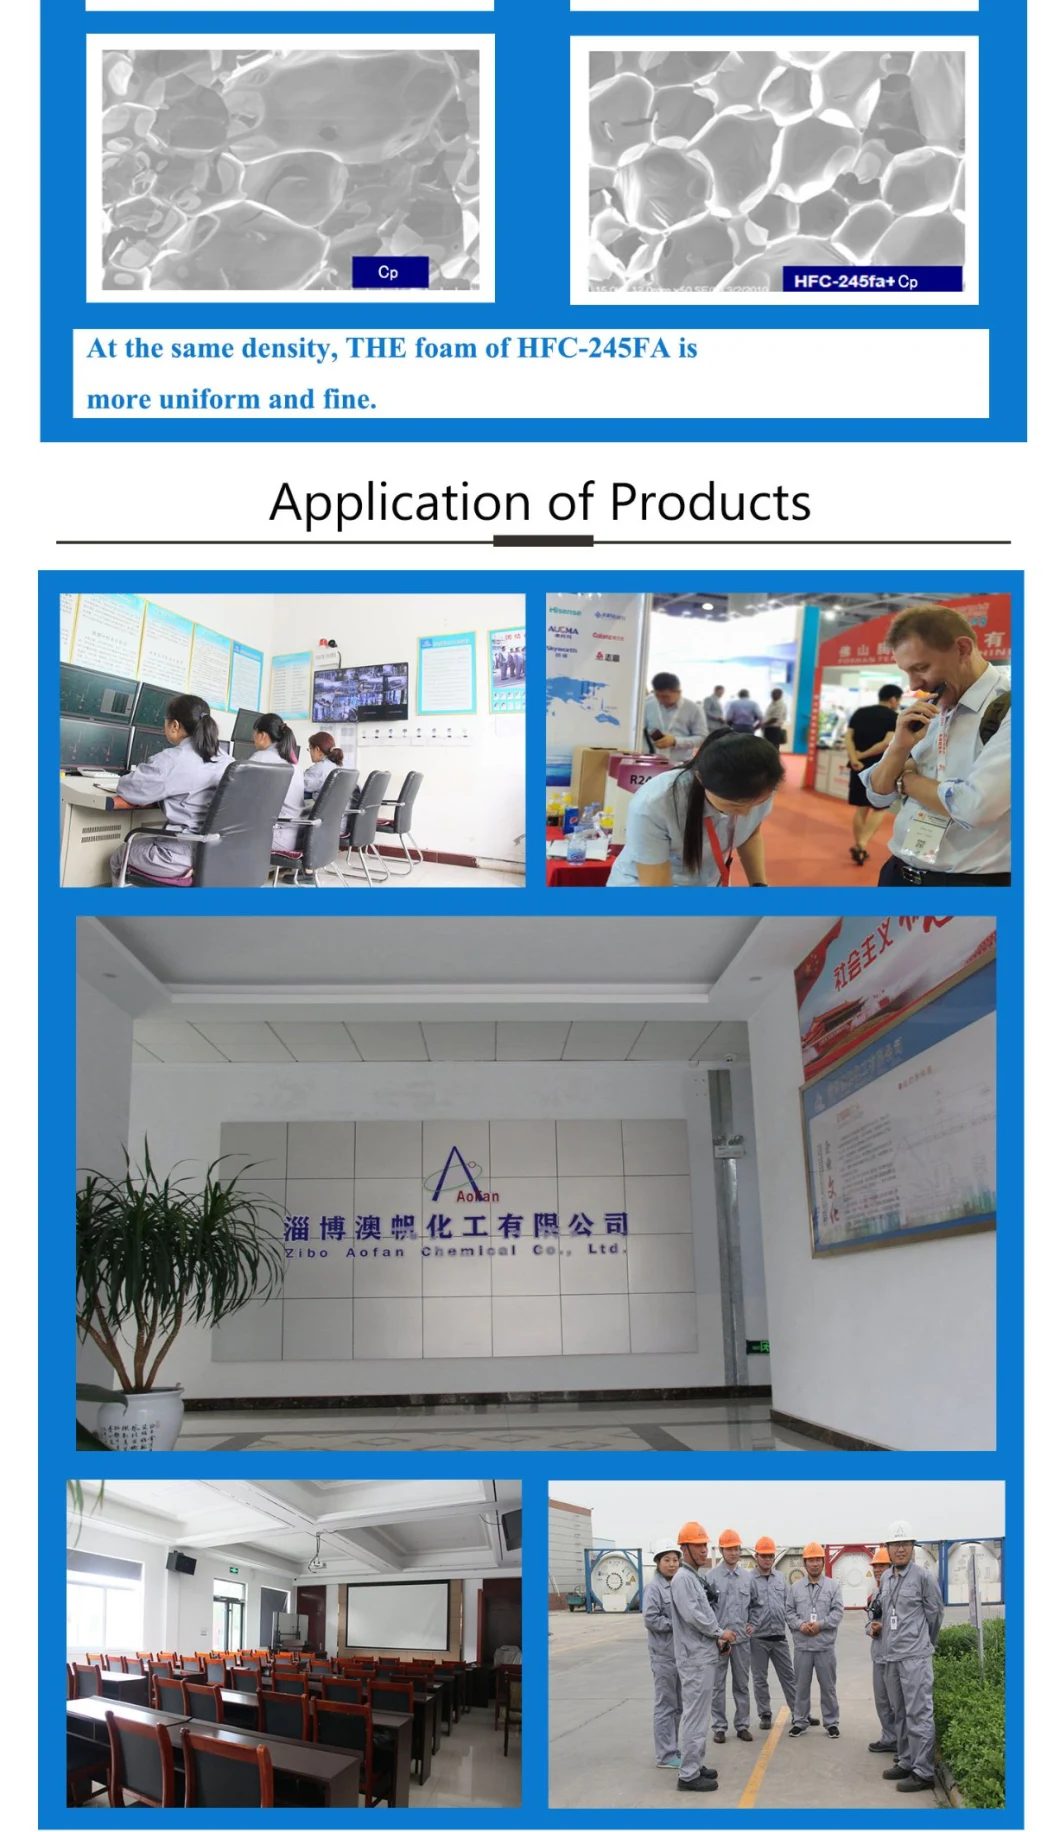 Factory Supply Factory Supply Refrigerant Gas Factory Price R32